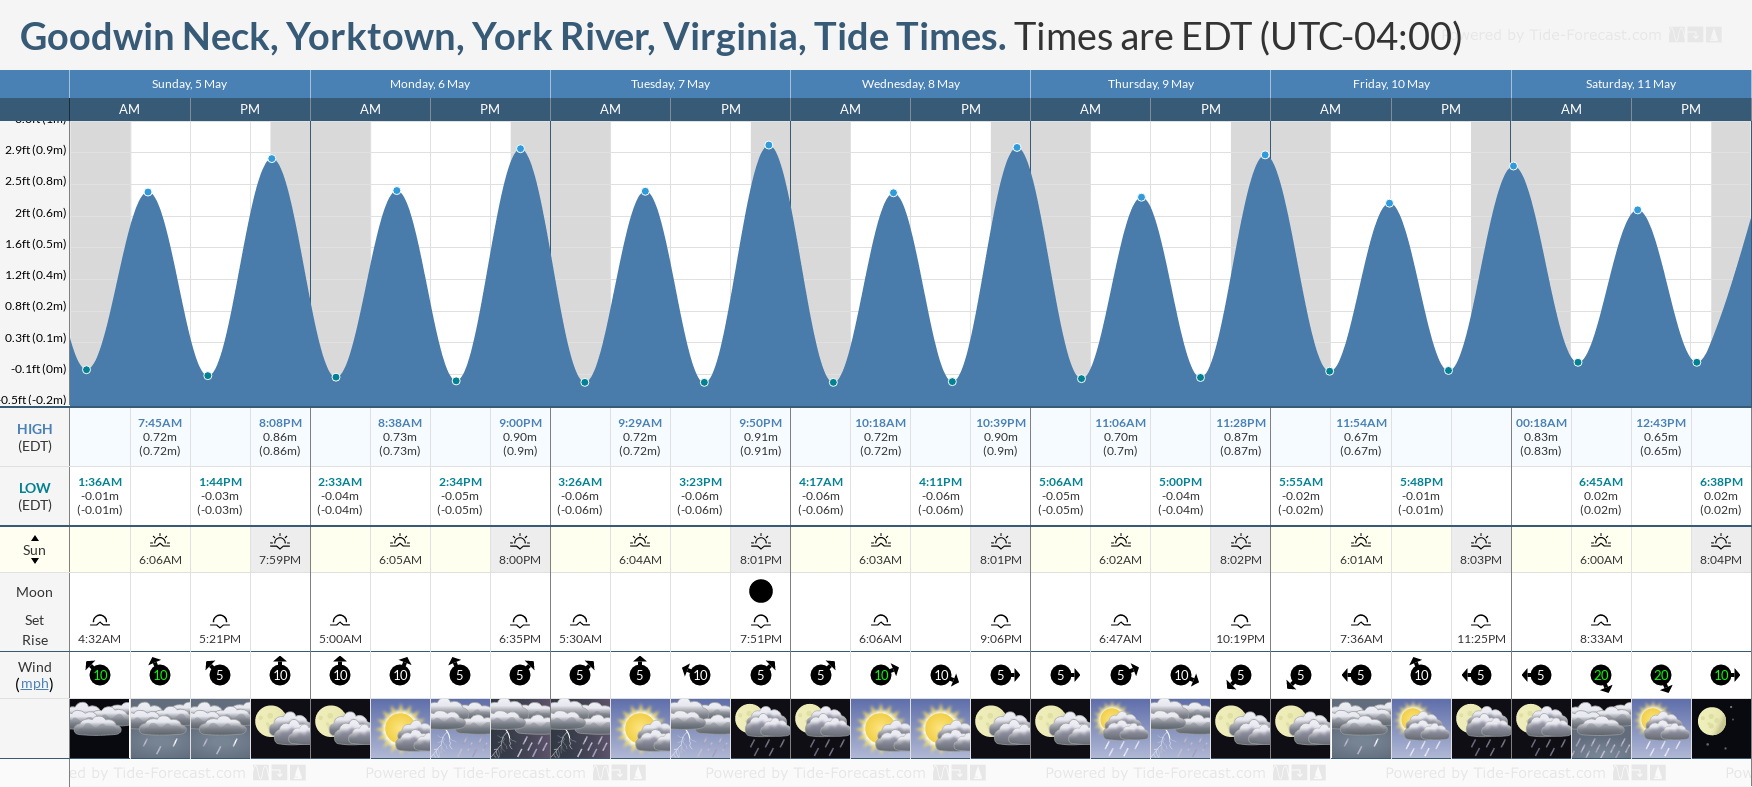 Goodwin Neck, Yorktown, York River, Virginia Tide Chart including high and low tide tide times for the next 7 days